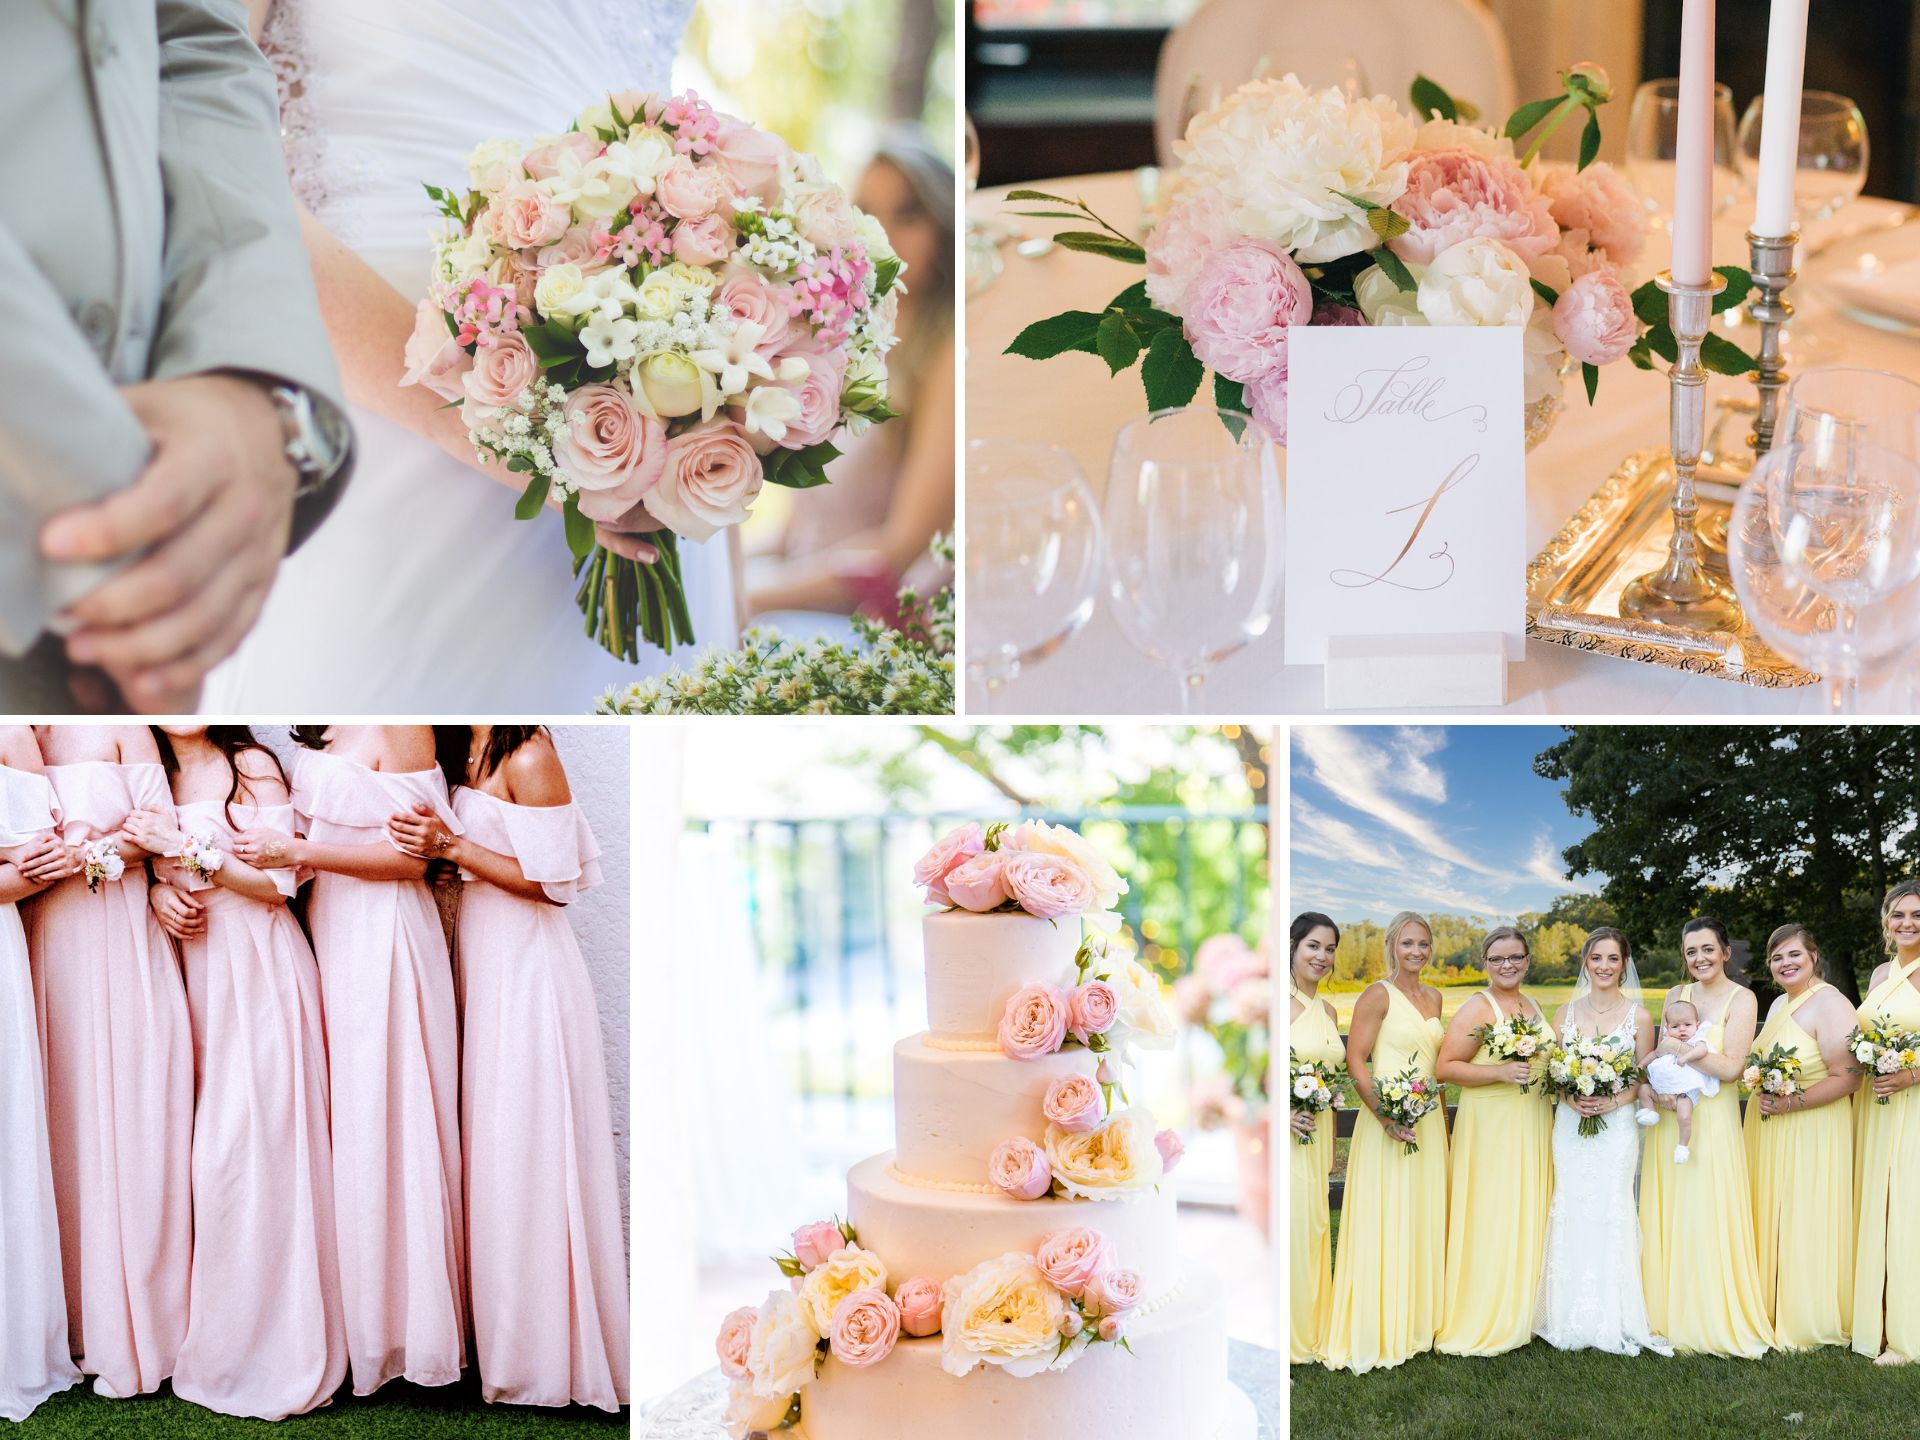 A photo collage with light pink and yellow wedding color ideas.